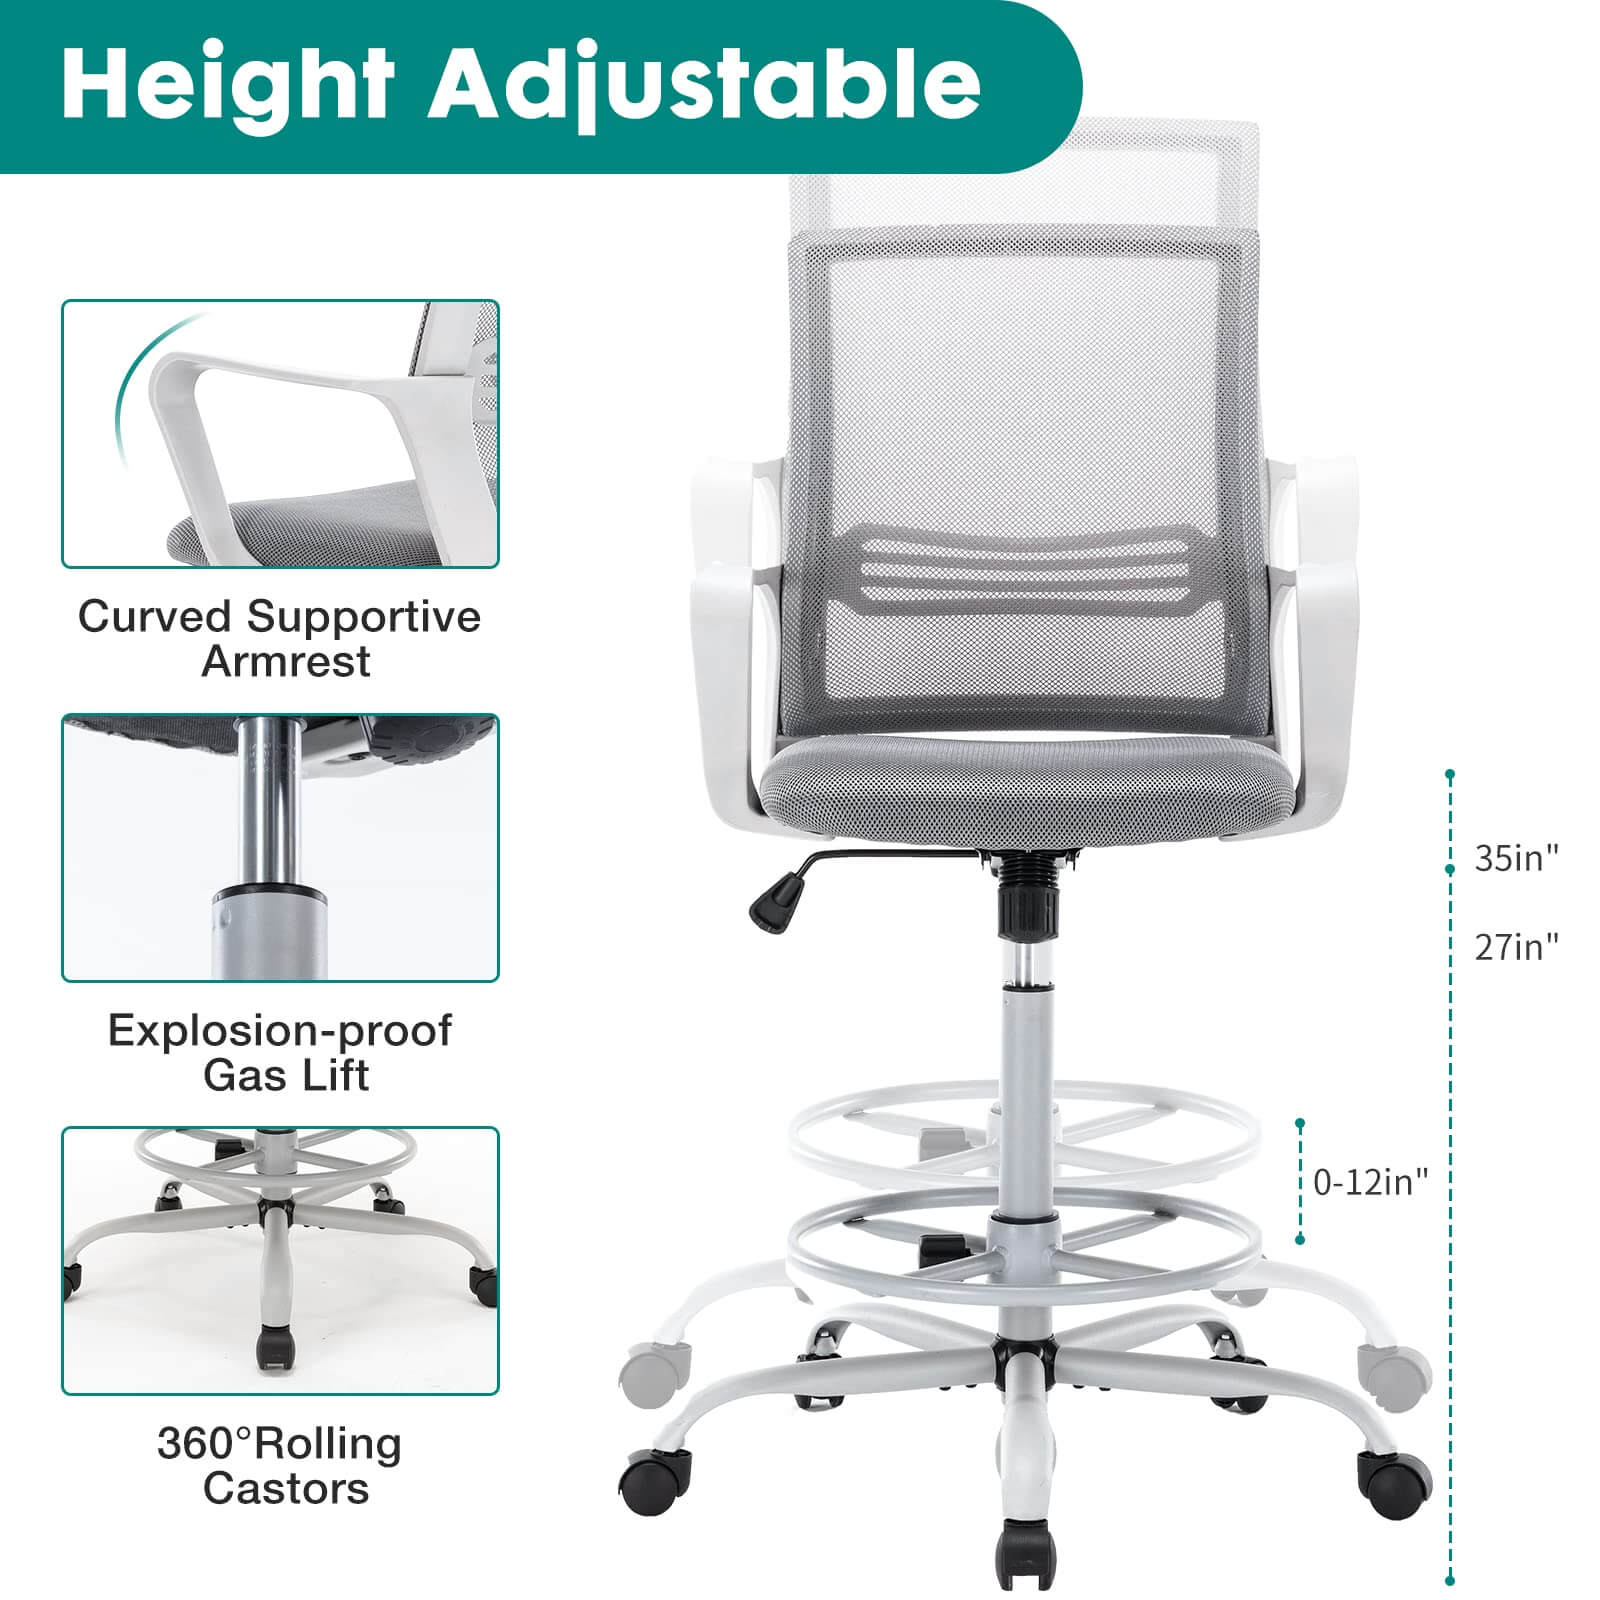 office-chair-standing-adjustable#Color_Gray1